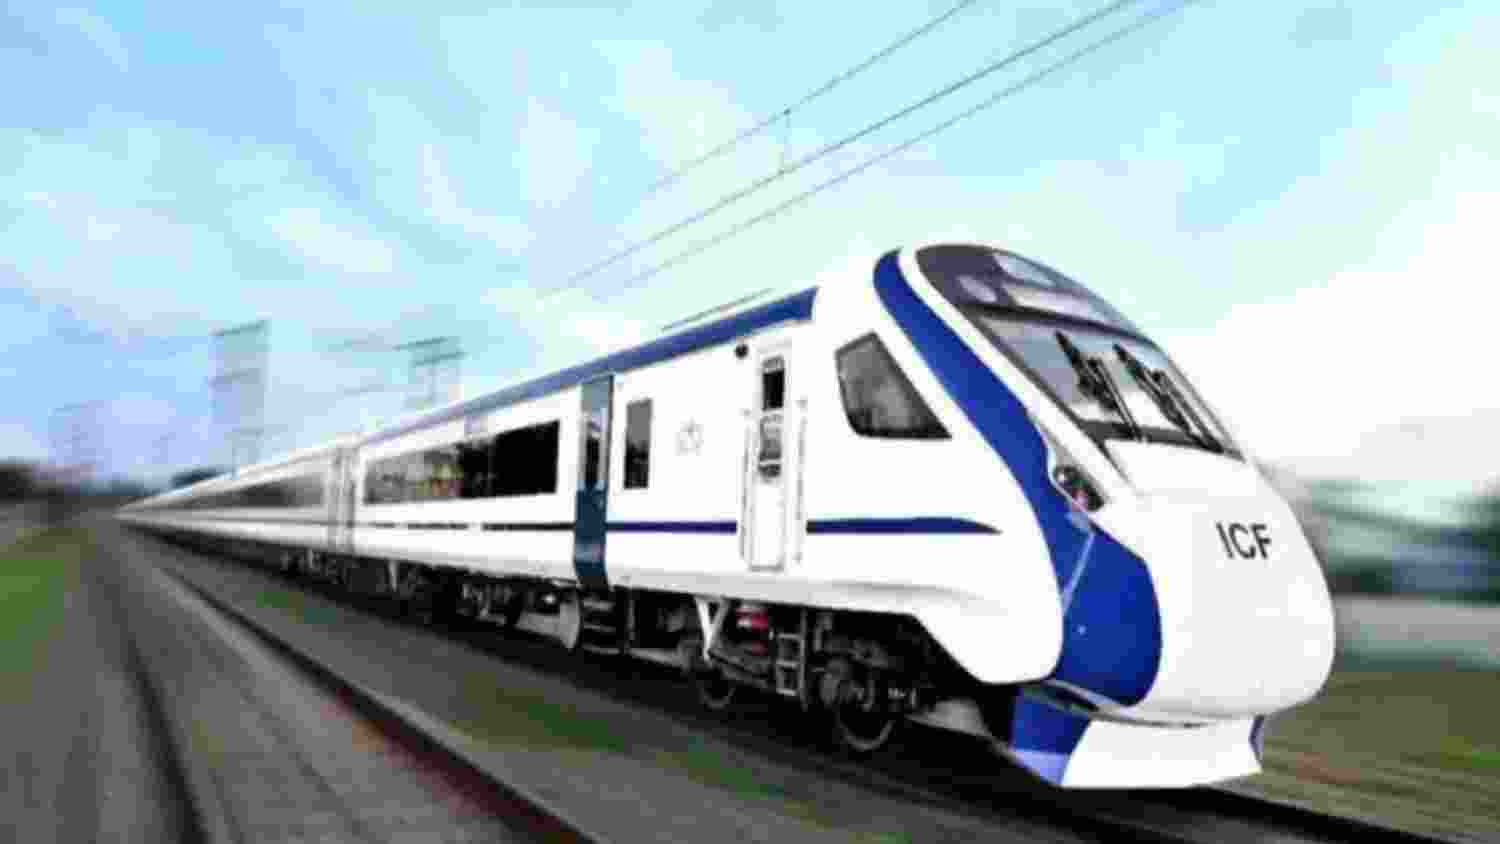 India's rail modernisation rivals Europe, adds 31,000-km track in 10 years